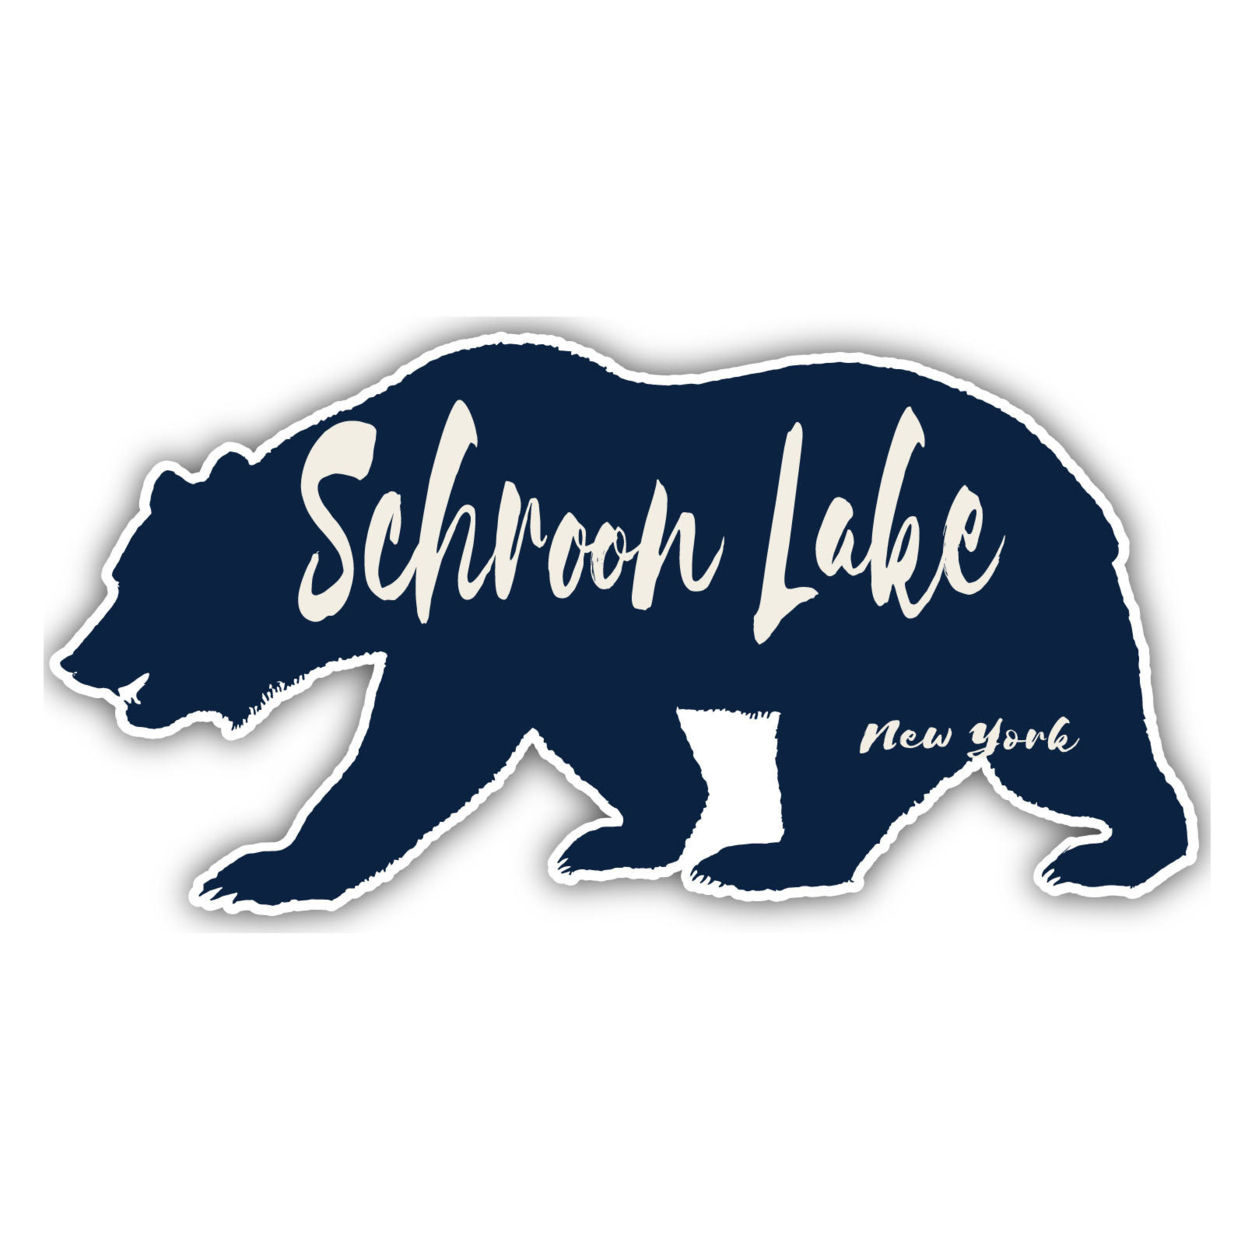 Schroon Lake New York Souvenir Decorative Stickers (Choose Theme And Size) - Single Unit, 4-Inch, Tent